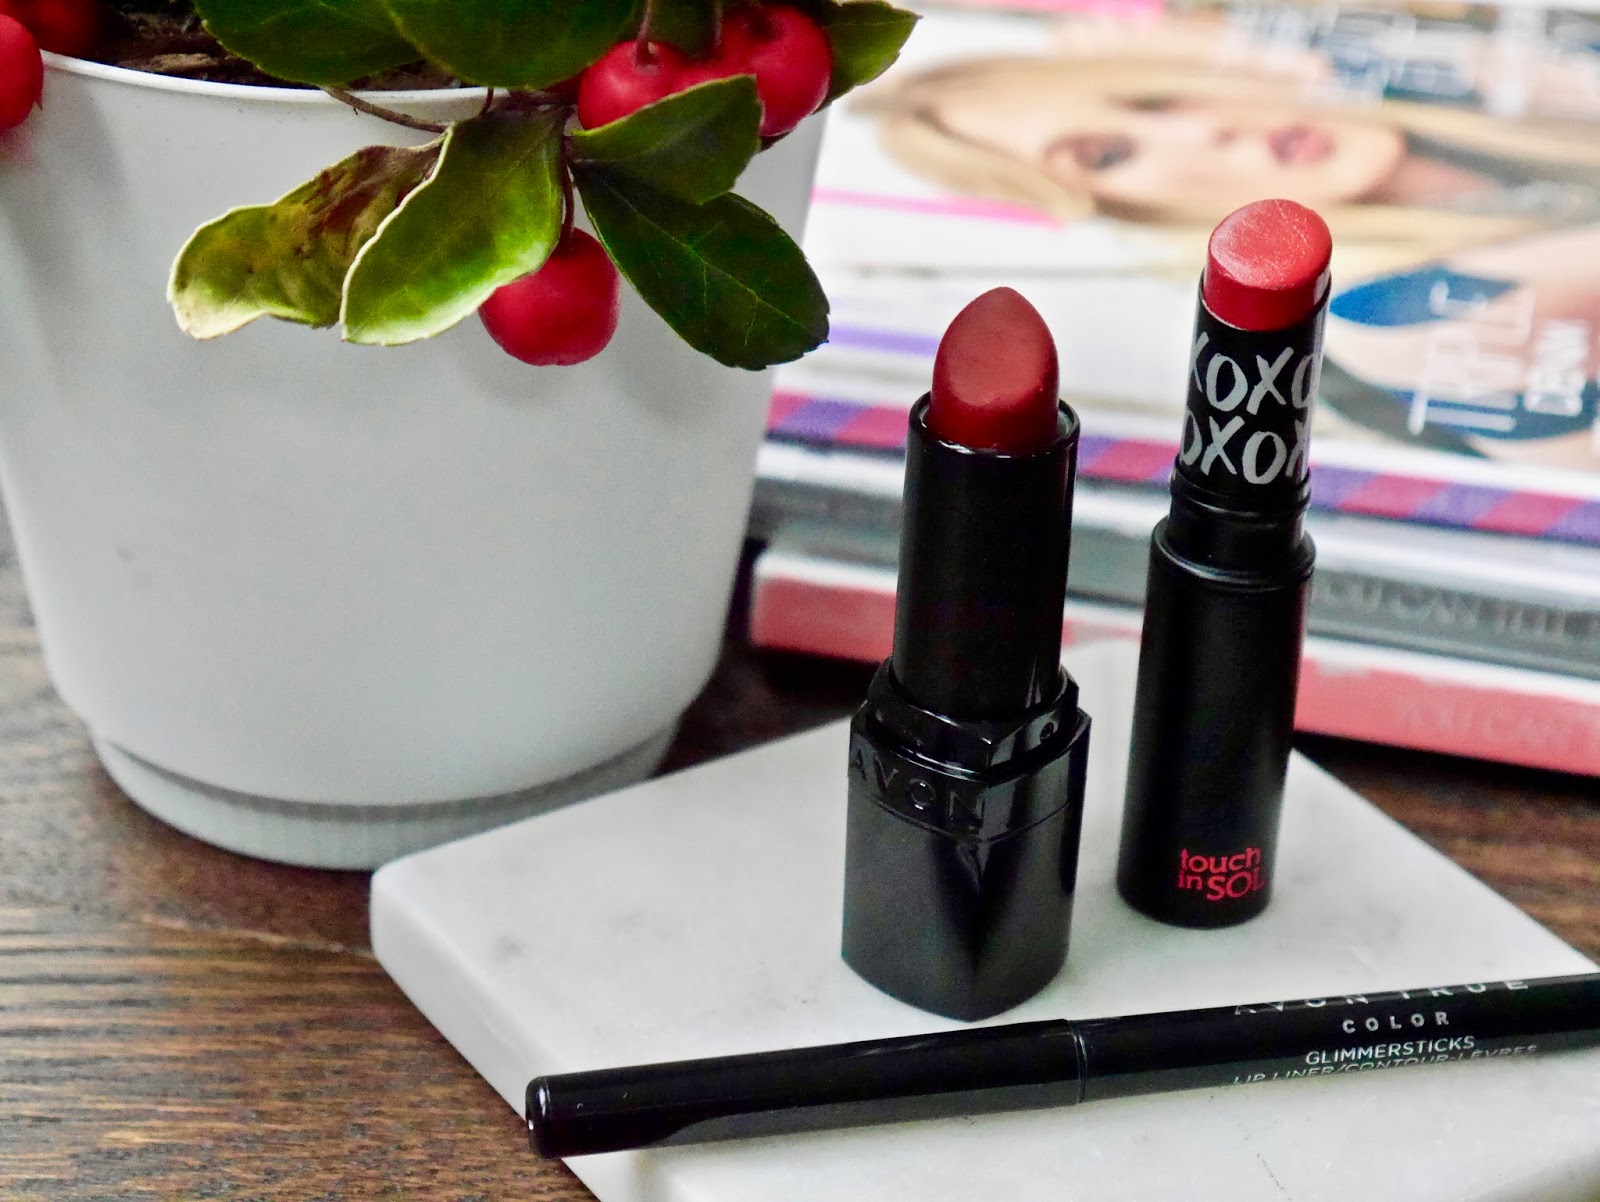 Canadian Beauty, Sephora, Lipstick, Red lips, Red lipstick, red, lip liner, hydrating glossy lips